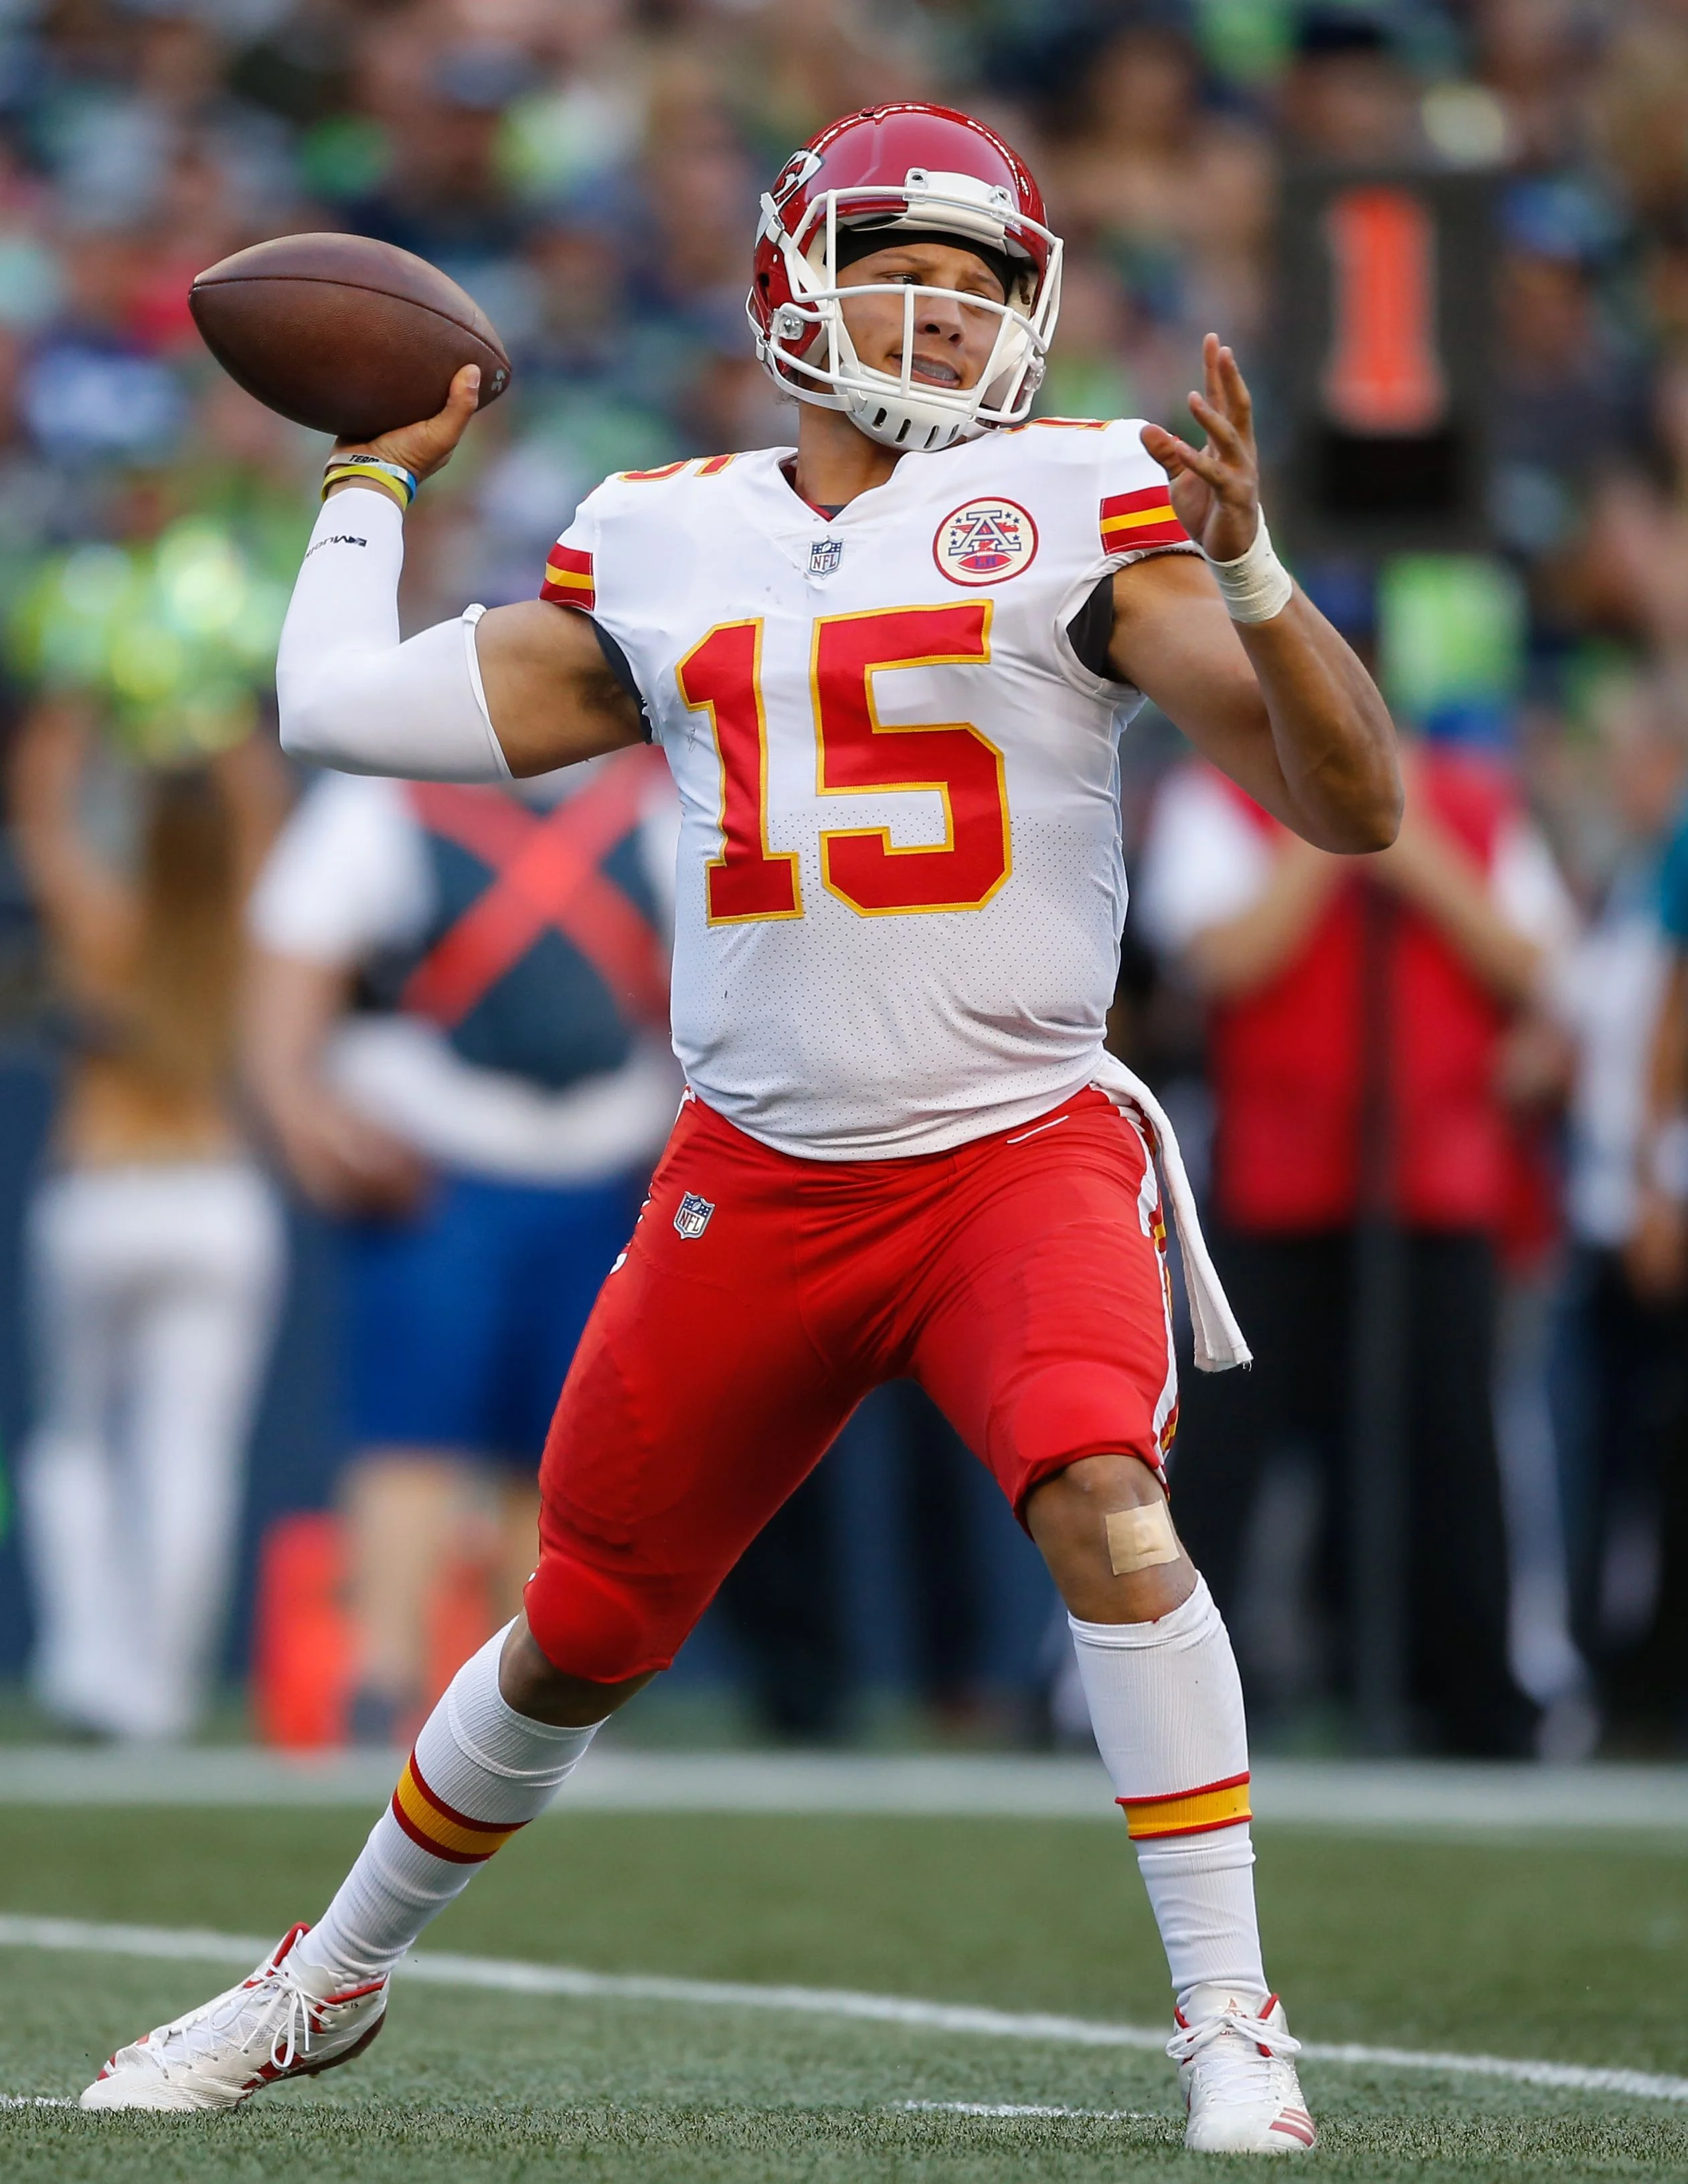 Patrick+Mahomes+Limps+Onto+Field%2C+Should+Athletes+Be+Playing+While+Injured%3F